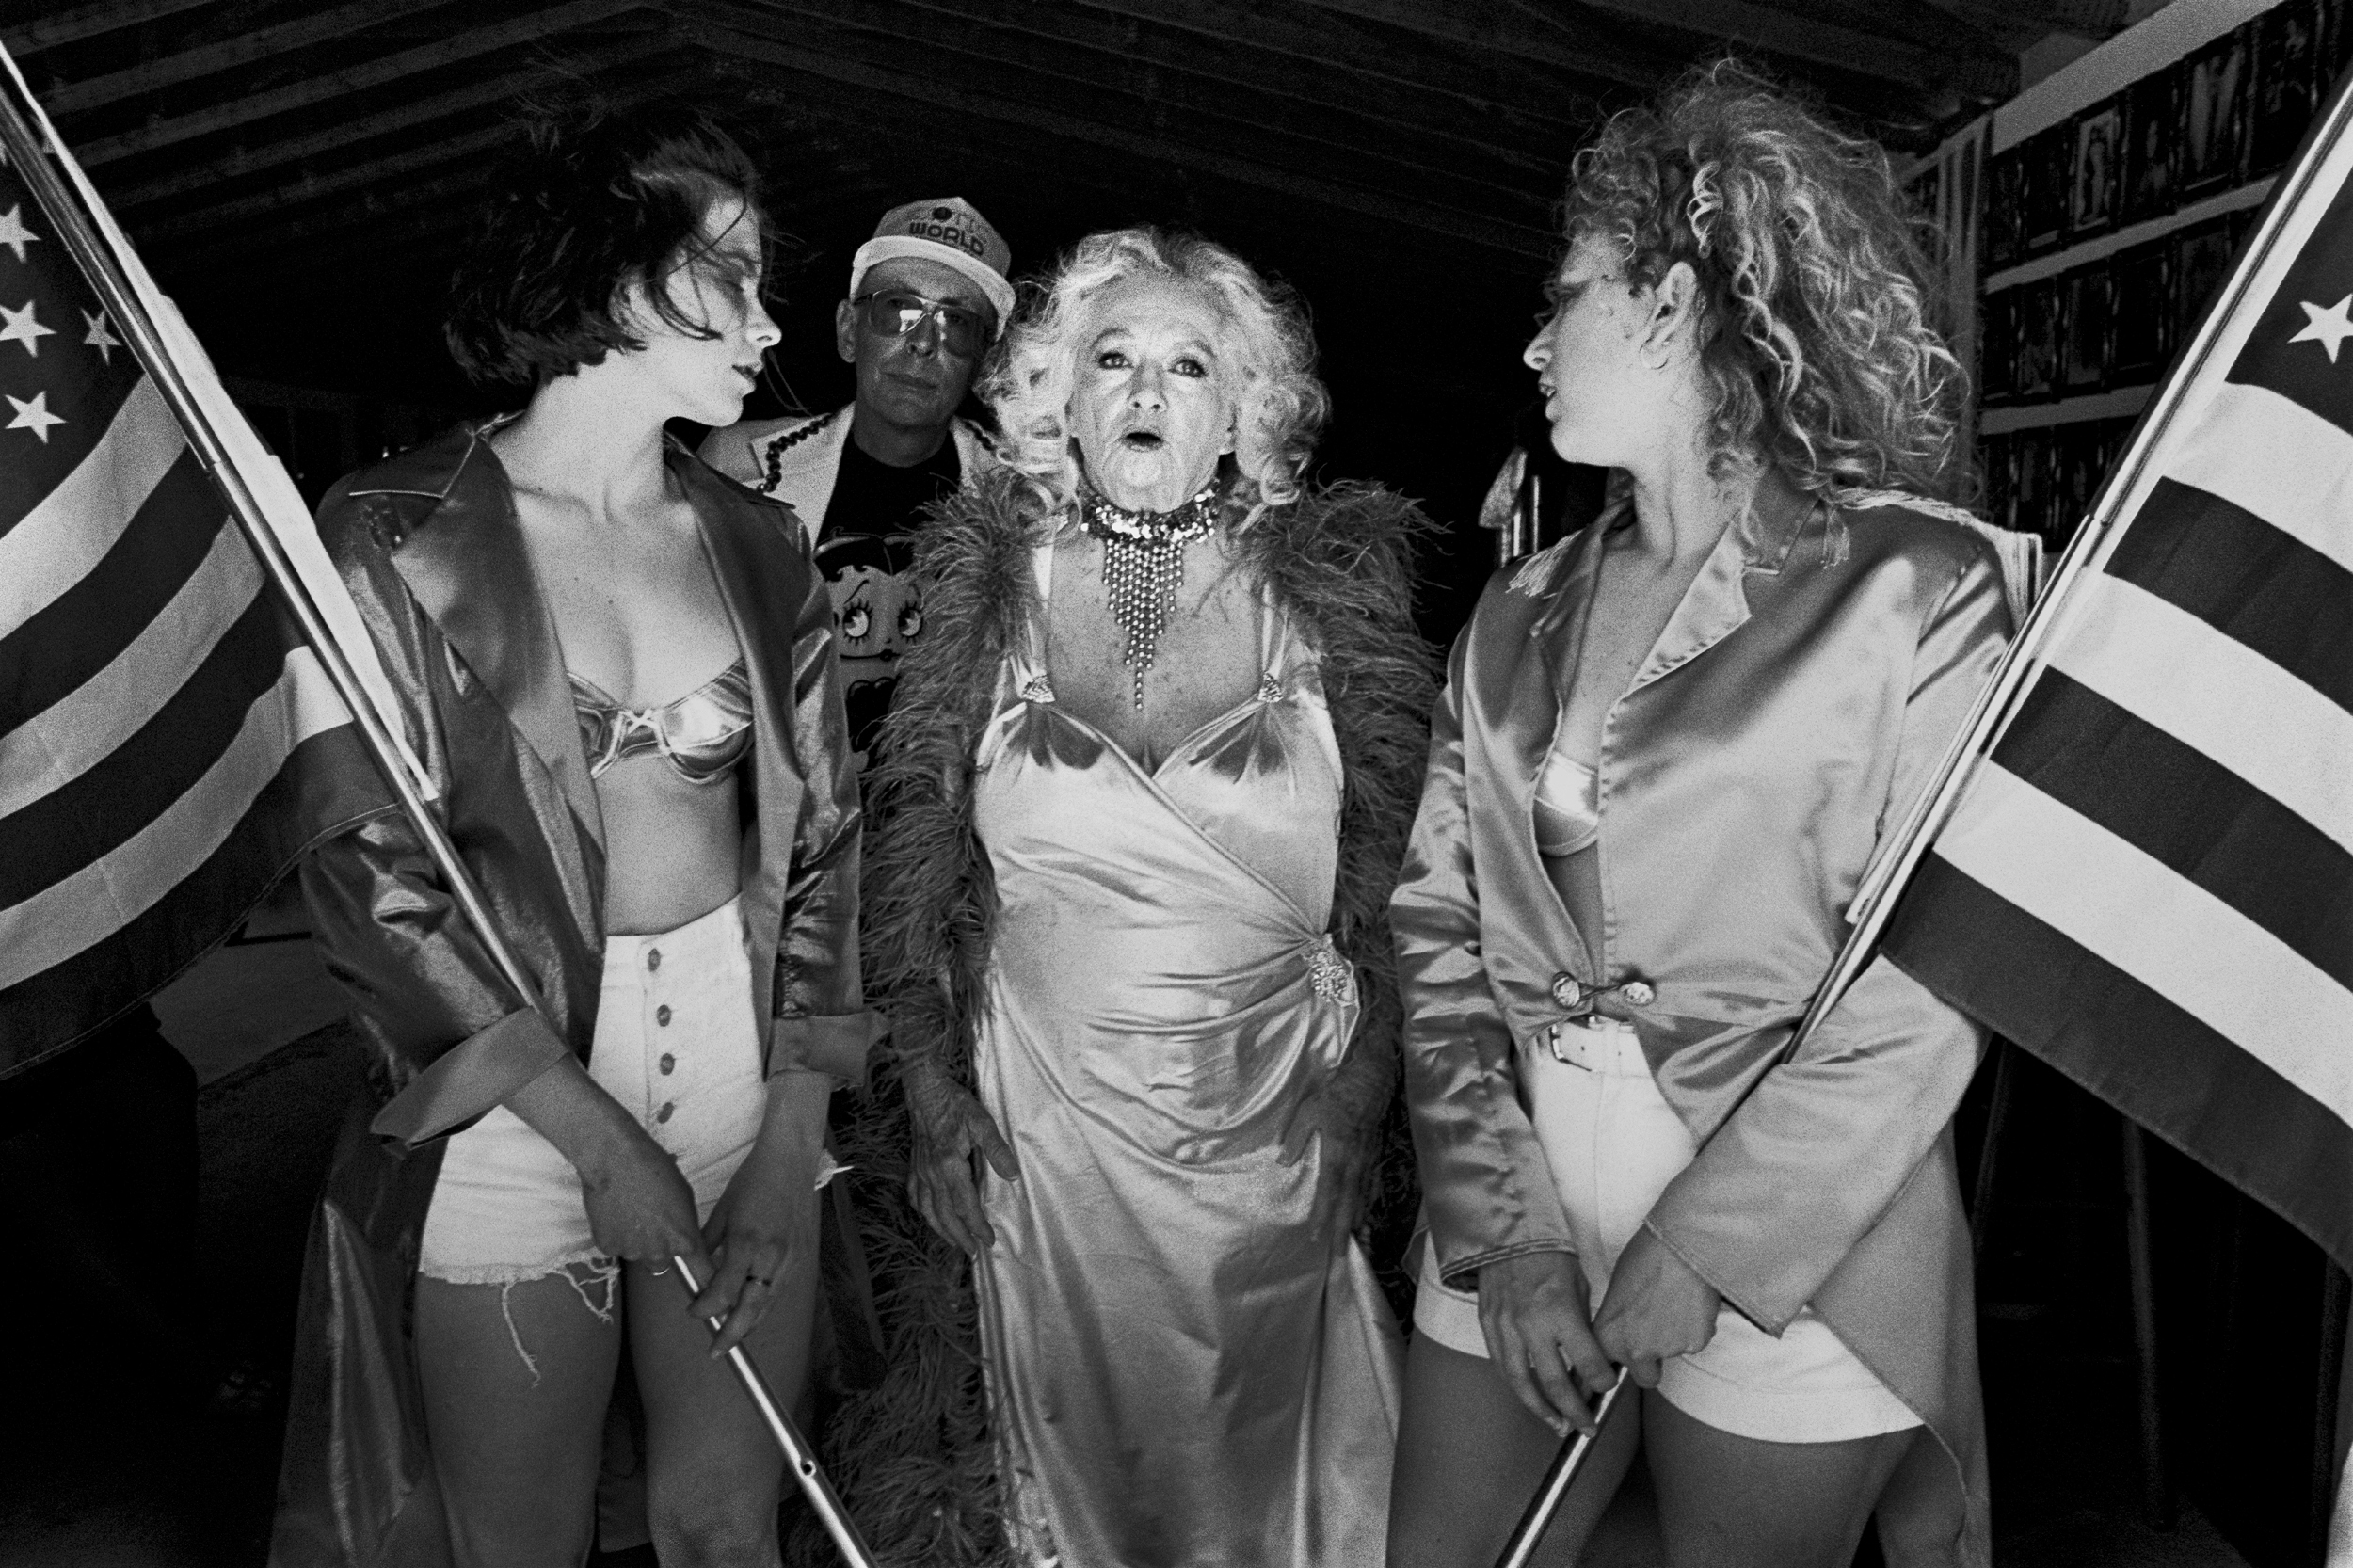 Dixie Evans, 71, a former burlesque dancer and the proprietor of the Burlesque Hall of Fame and Historical Museum, prepares to hit the stage at the 41st Annual Striptease Reunion and Miss Exotic World Contest. (Helendale, CA, 1998)